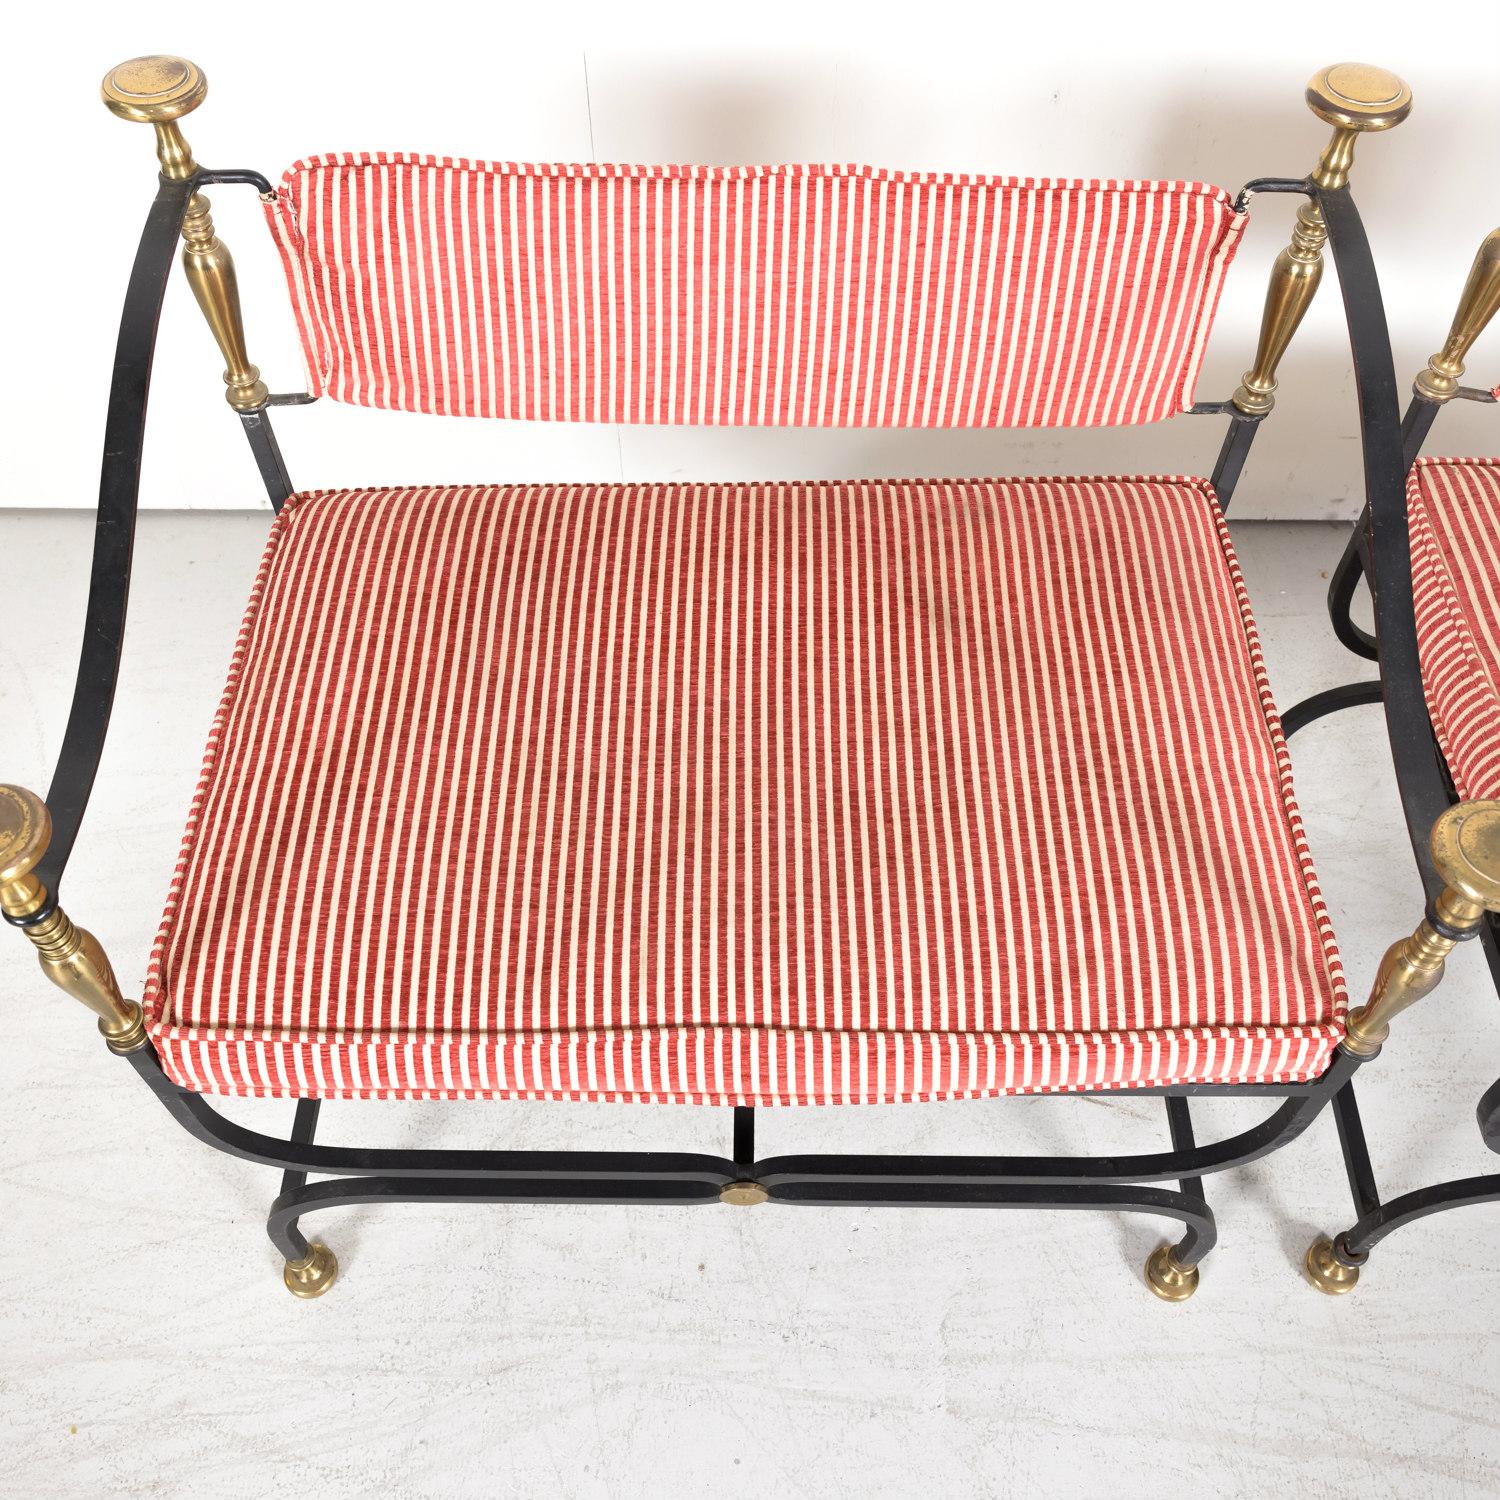 A handsome pair of Italian Savonarola chairs or benches having sculptural black wrought iron frames with turned brass uprights topped with large brass pommels, X-stretchers decorated with brass floral medallions, and brass feet, circa 1950s. Striped